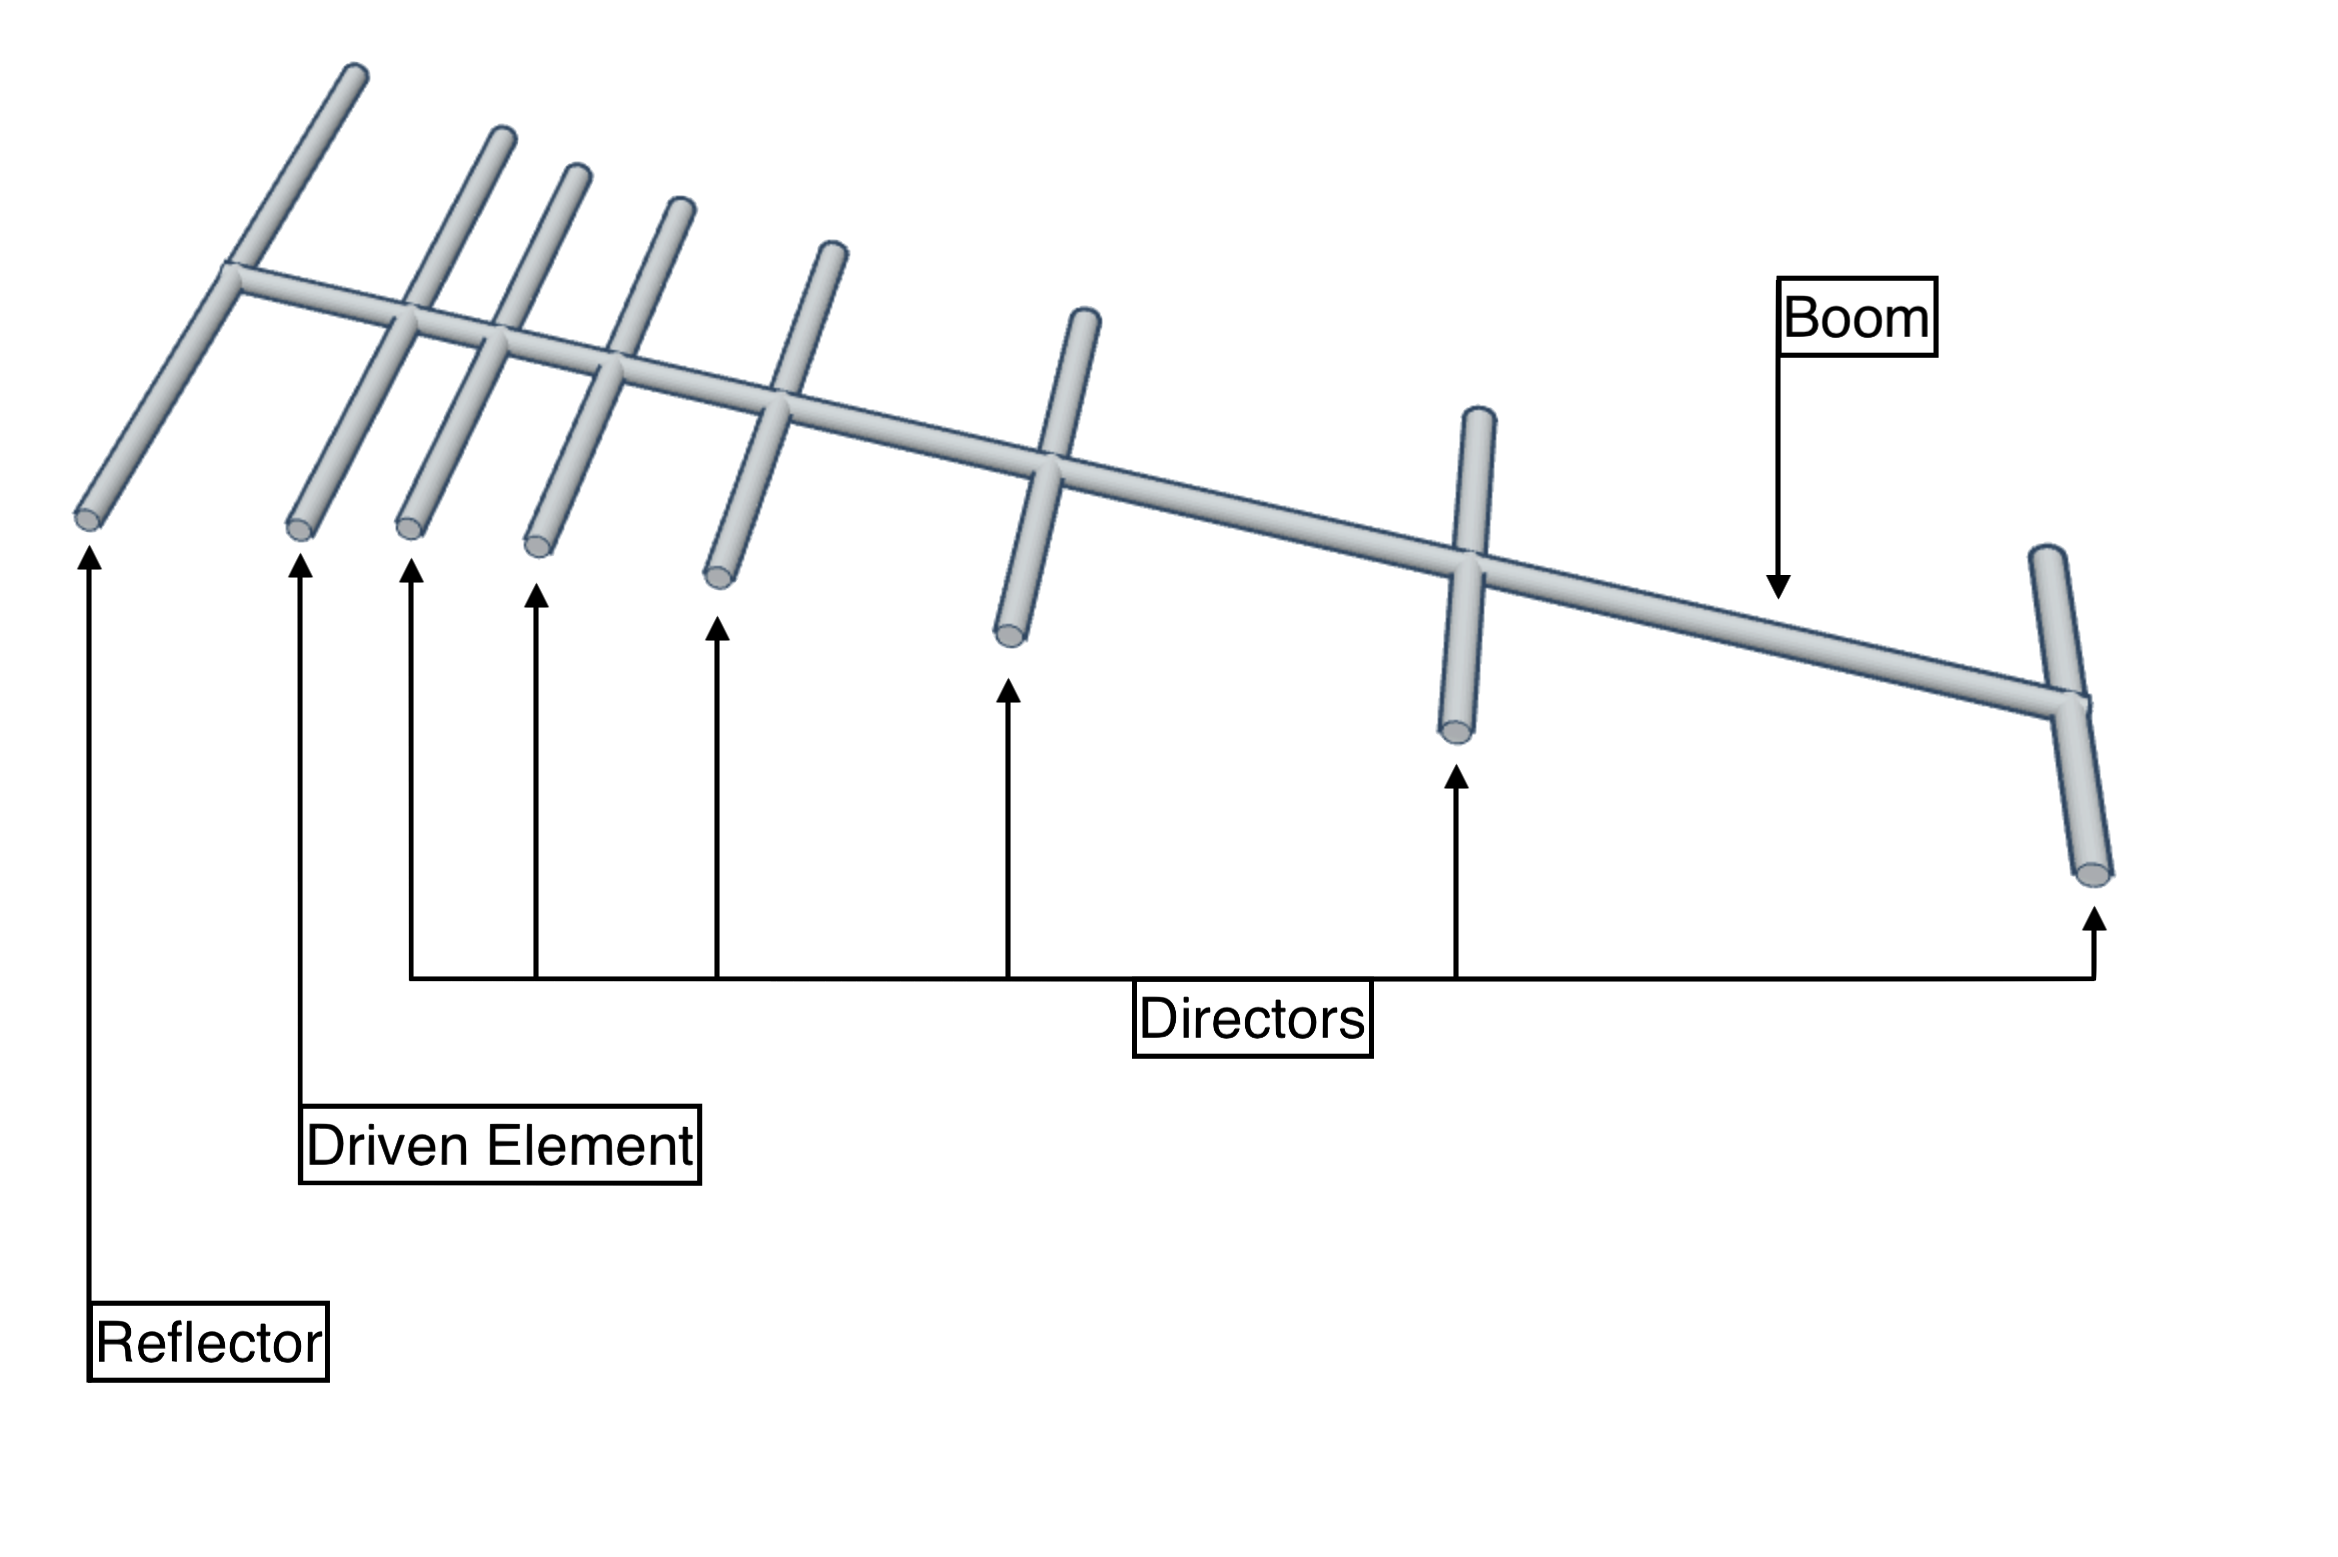 Diagram of the parts of a Yagi-Uda antenna with label names